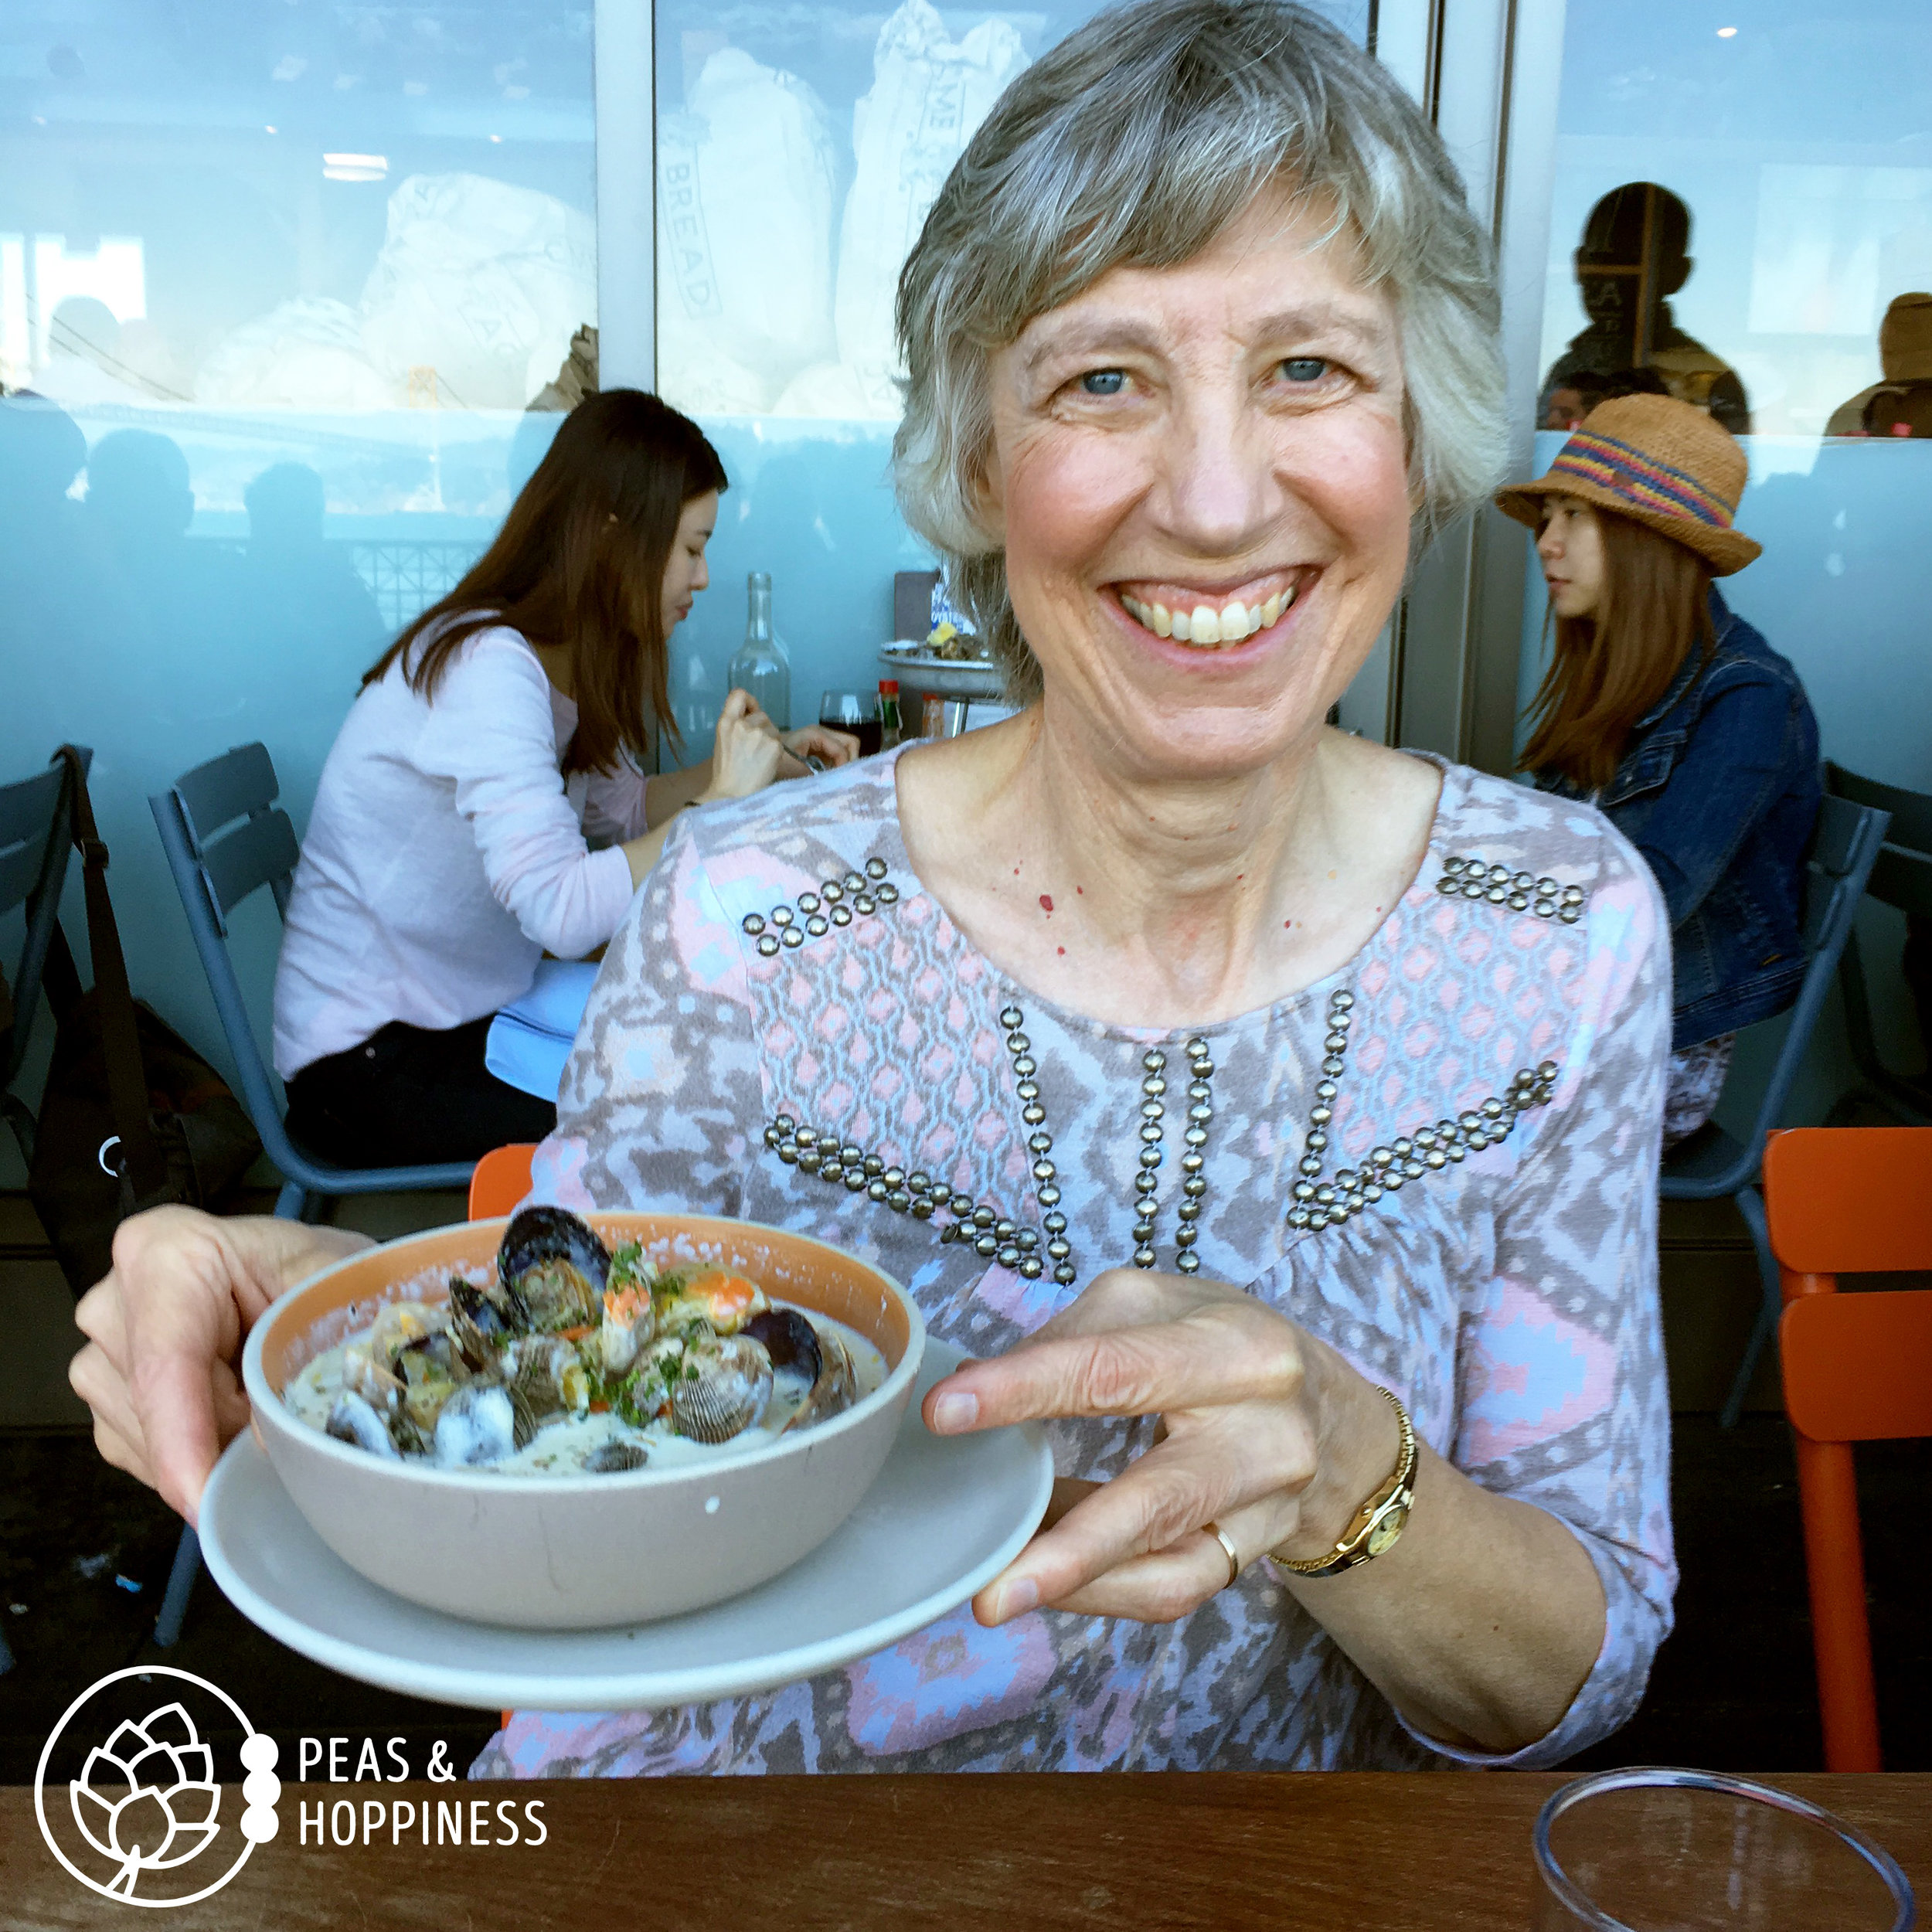 My beautiful mama with gluten-free clam chowder on our Mother/Daughter trip to San Francisco